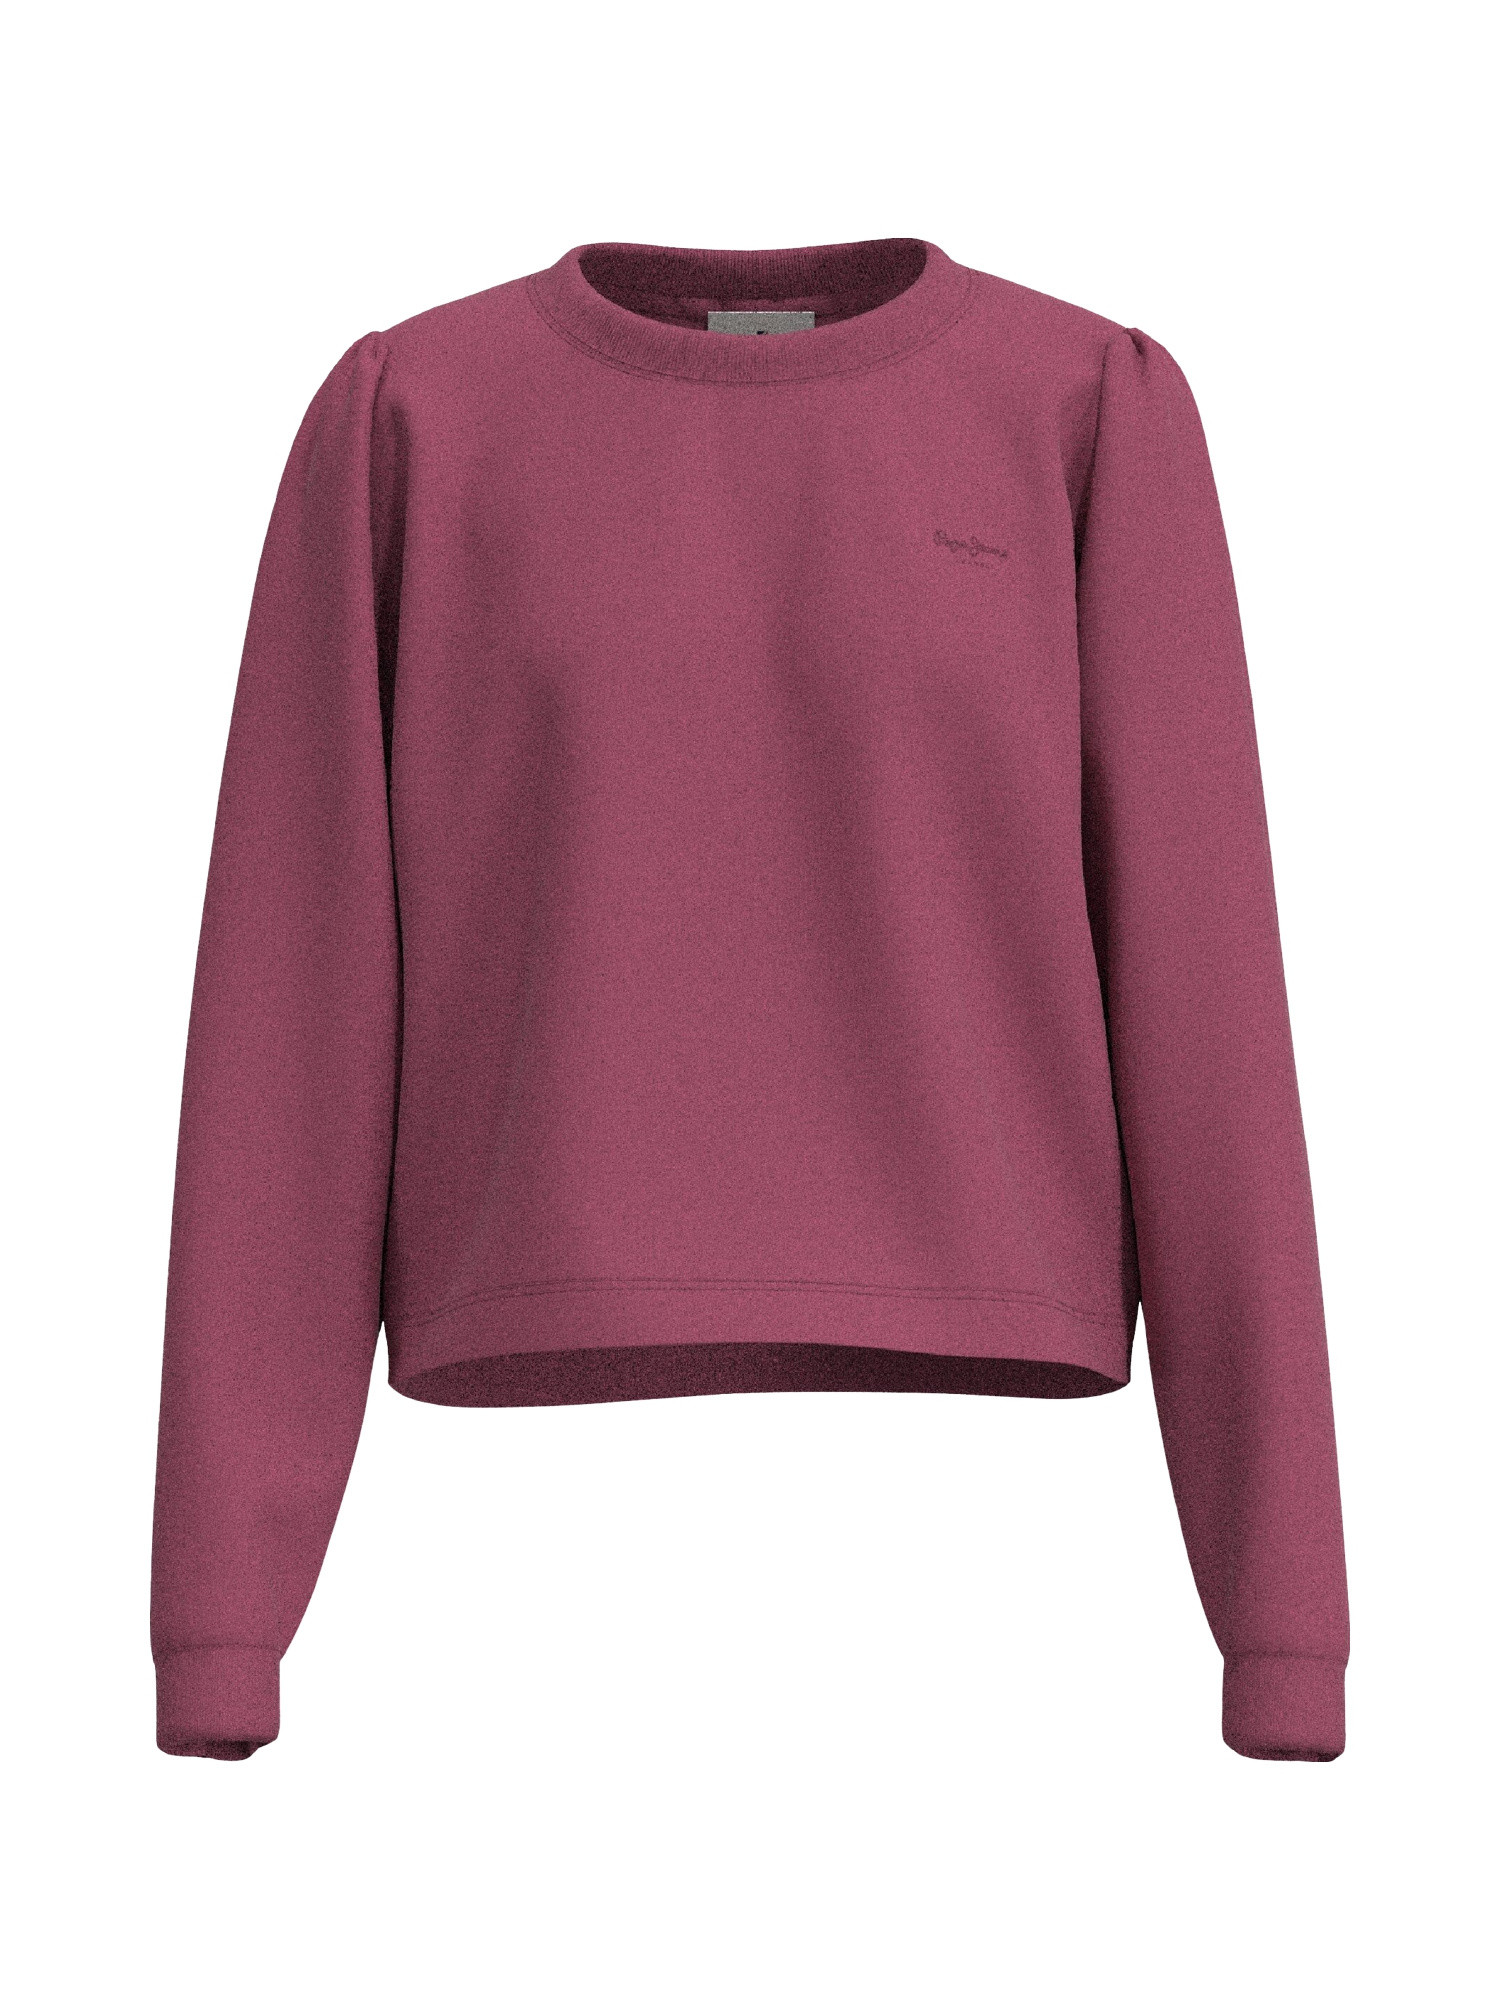 Pepe Jeans - Sweatshirt with puff sleeves, Antique Pink, large image number 0